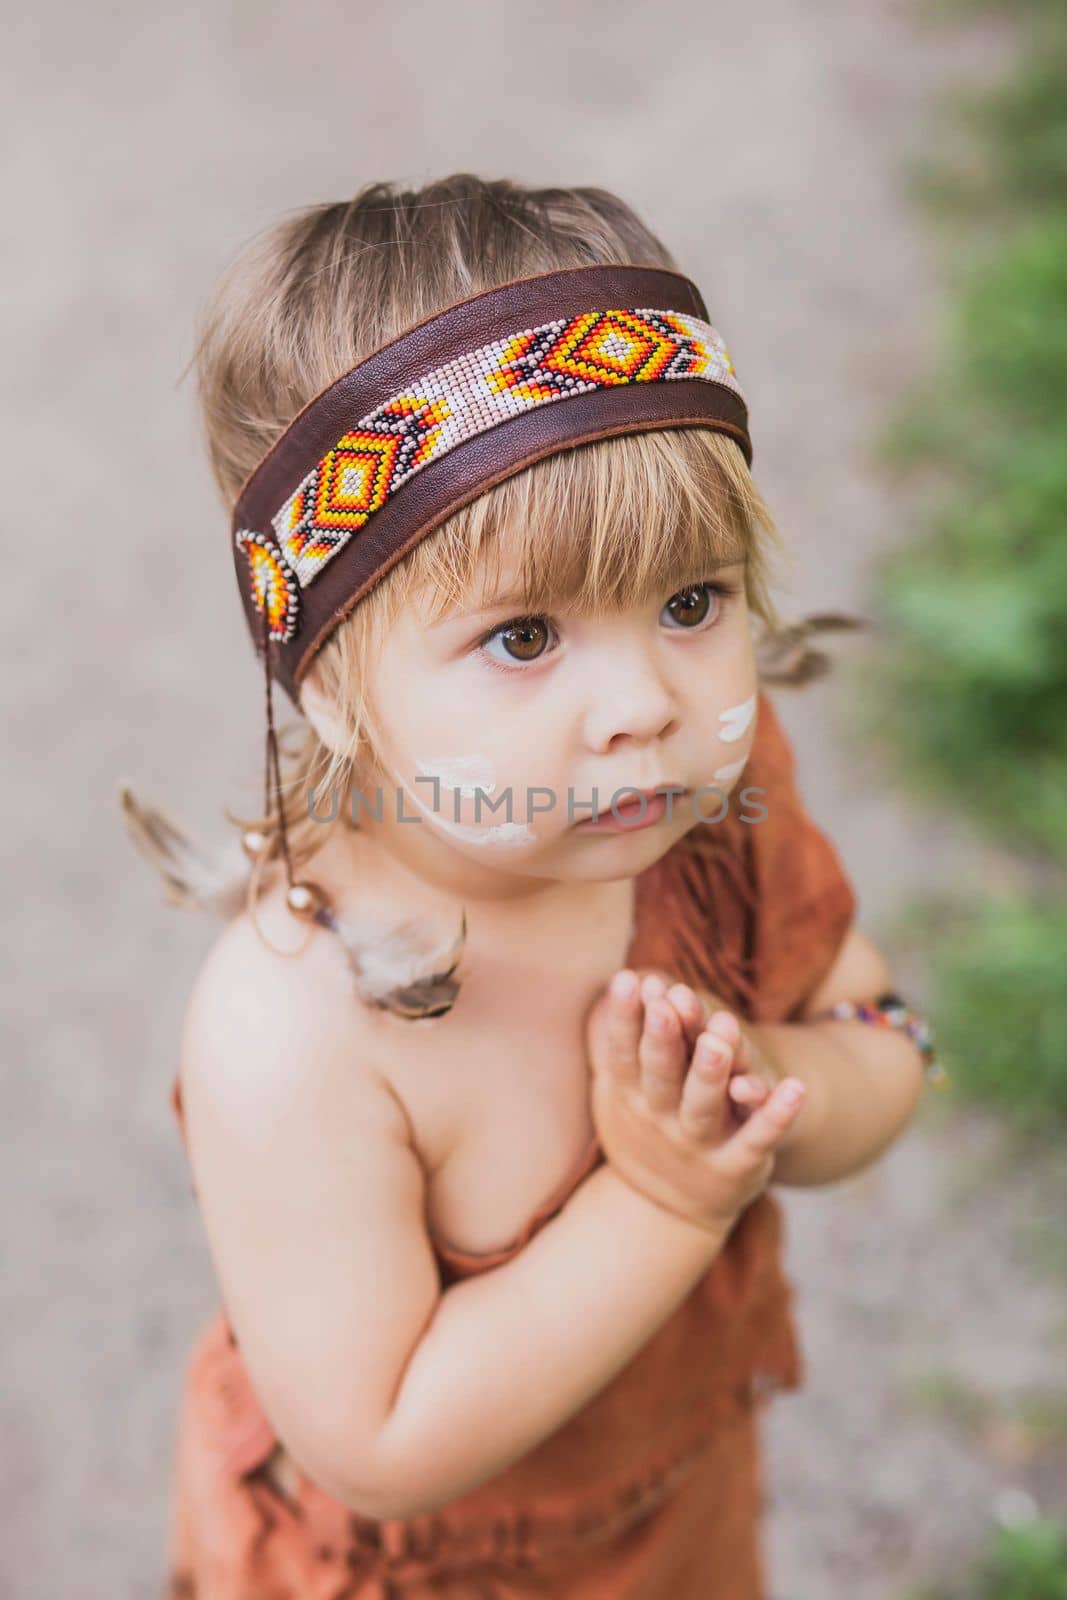 Cute baby dressed in traditional native americanс costume